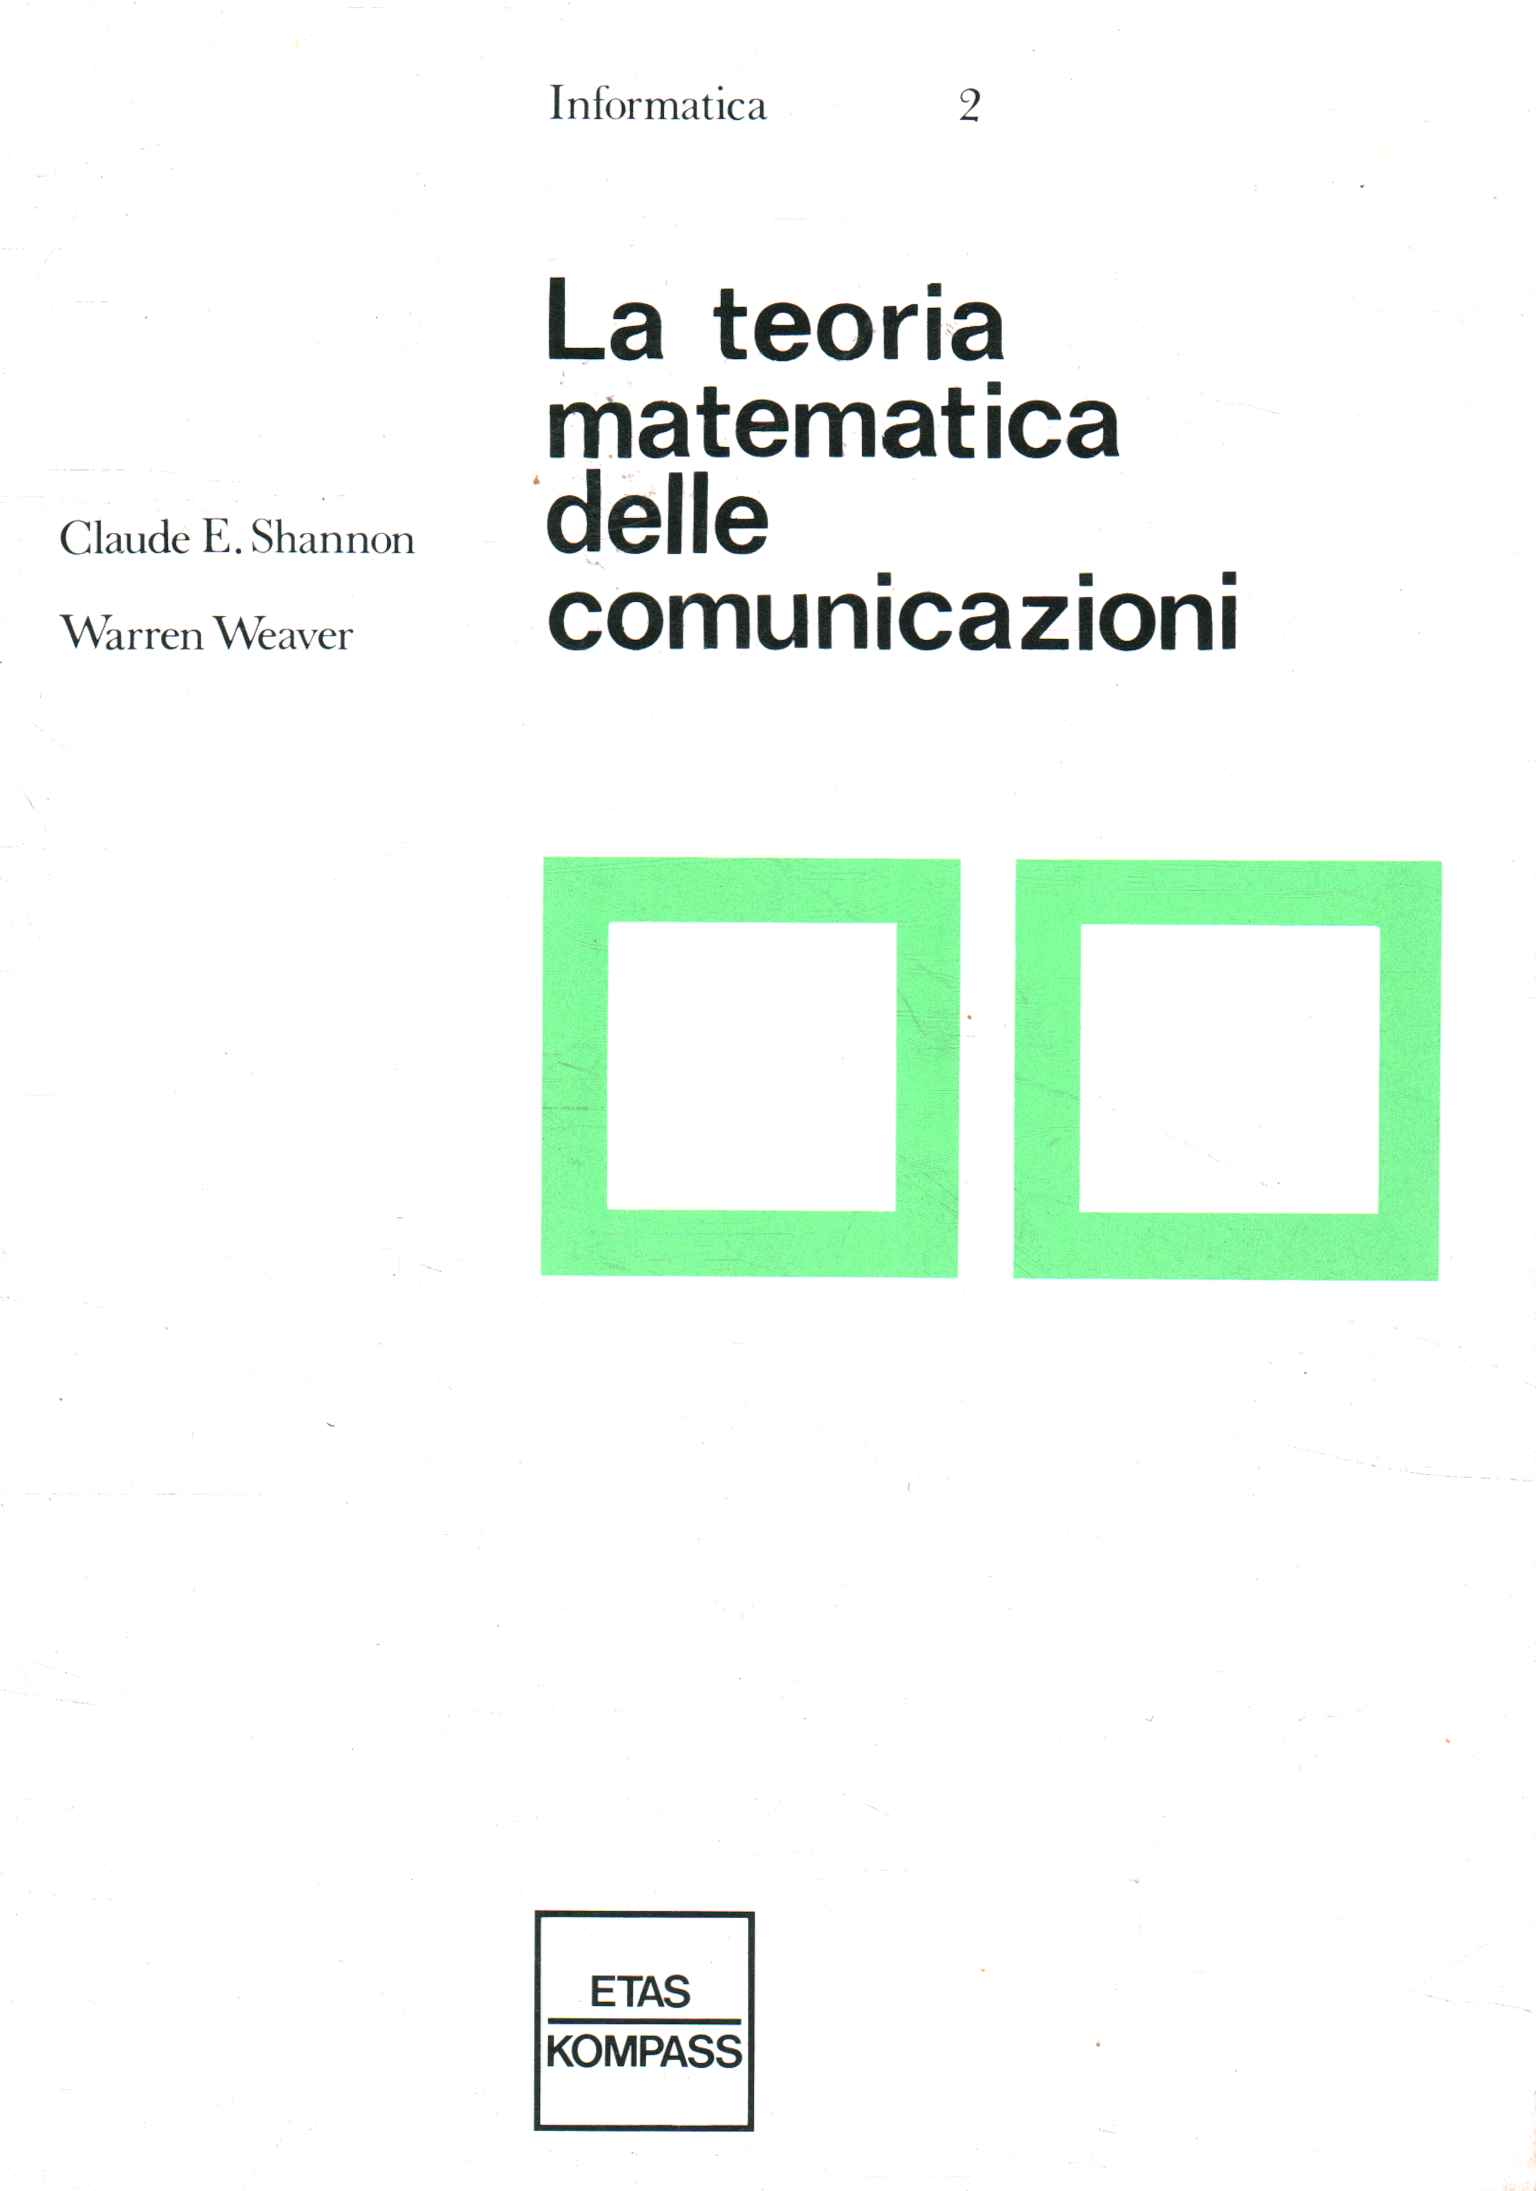 The mathematical theory of communications